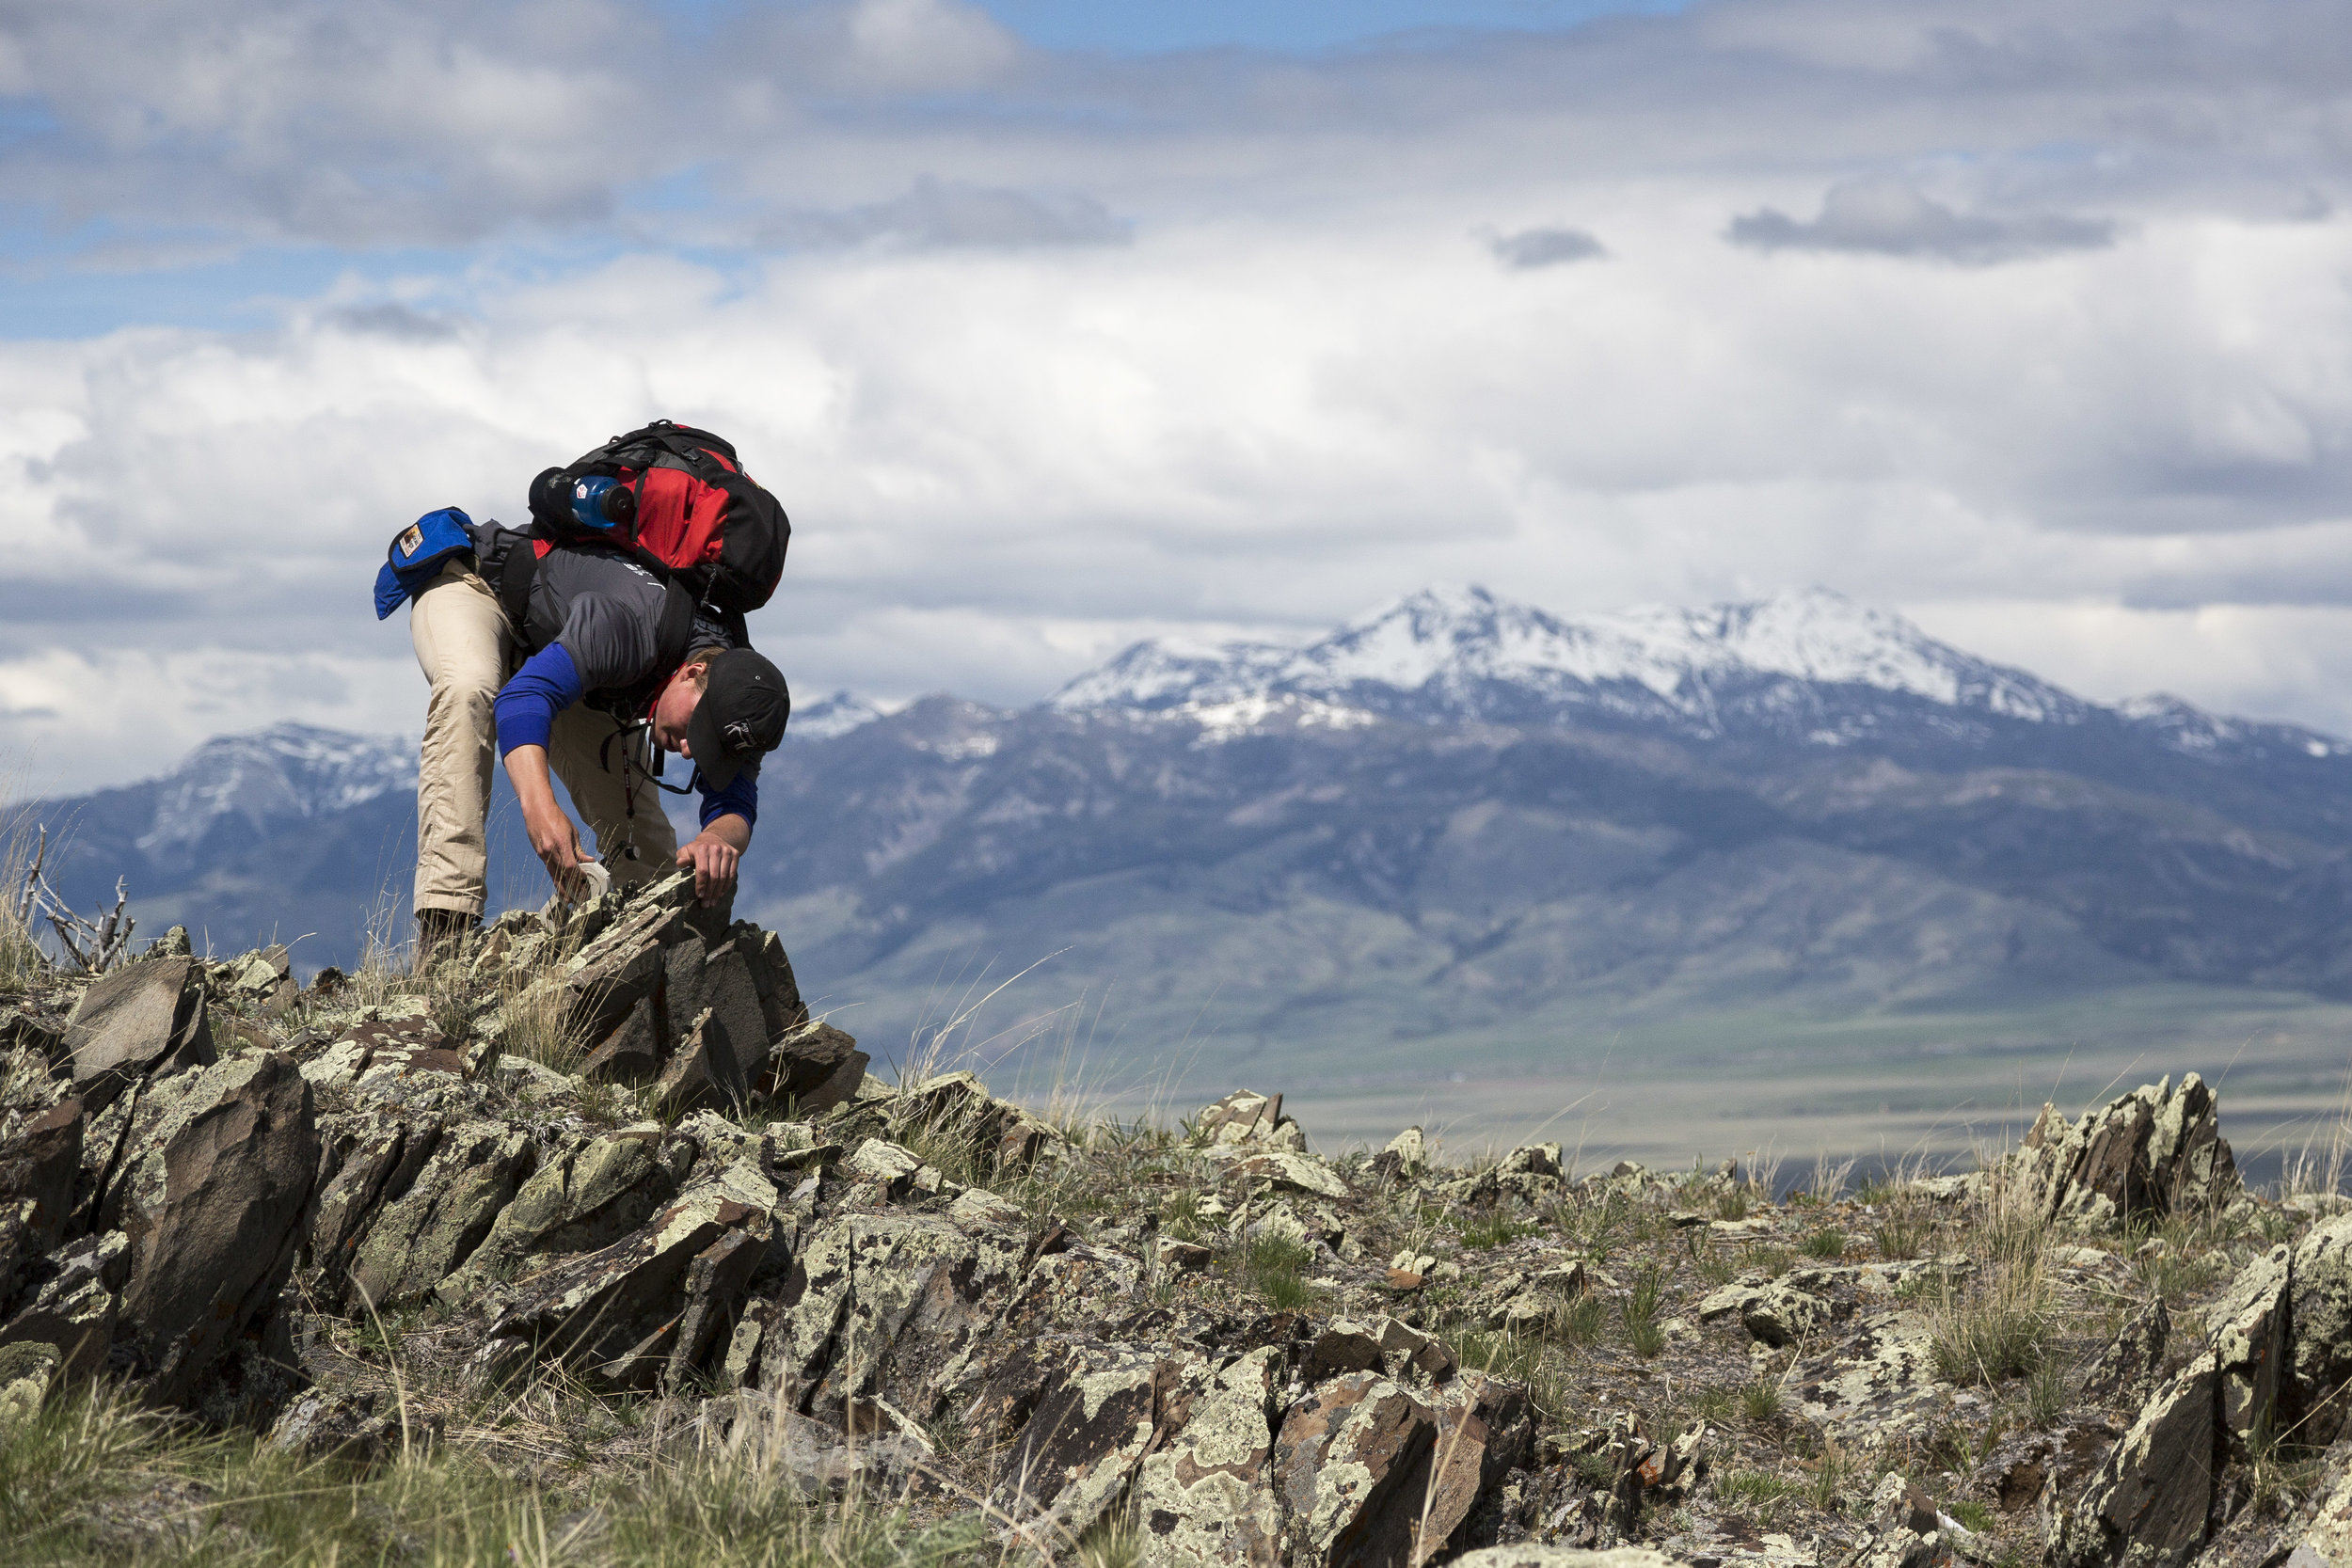  Nick Barker '18 measures the location and angle of different rock formations in the Gravely Mountains, with the Madison Mountains behind him in Ennis, Montana. Barker was enrolled in the Short Term course offering "Geology of the Northern Rockies an